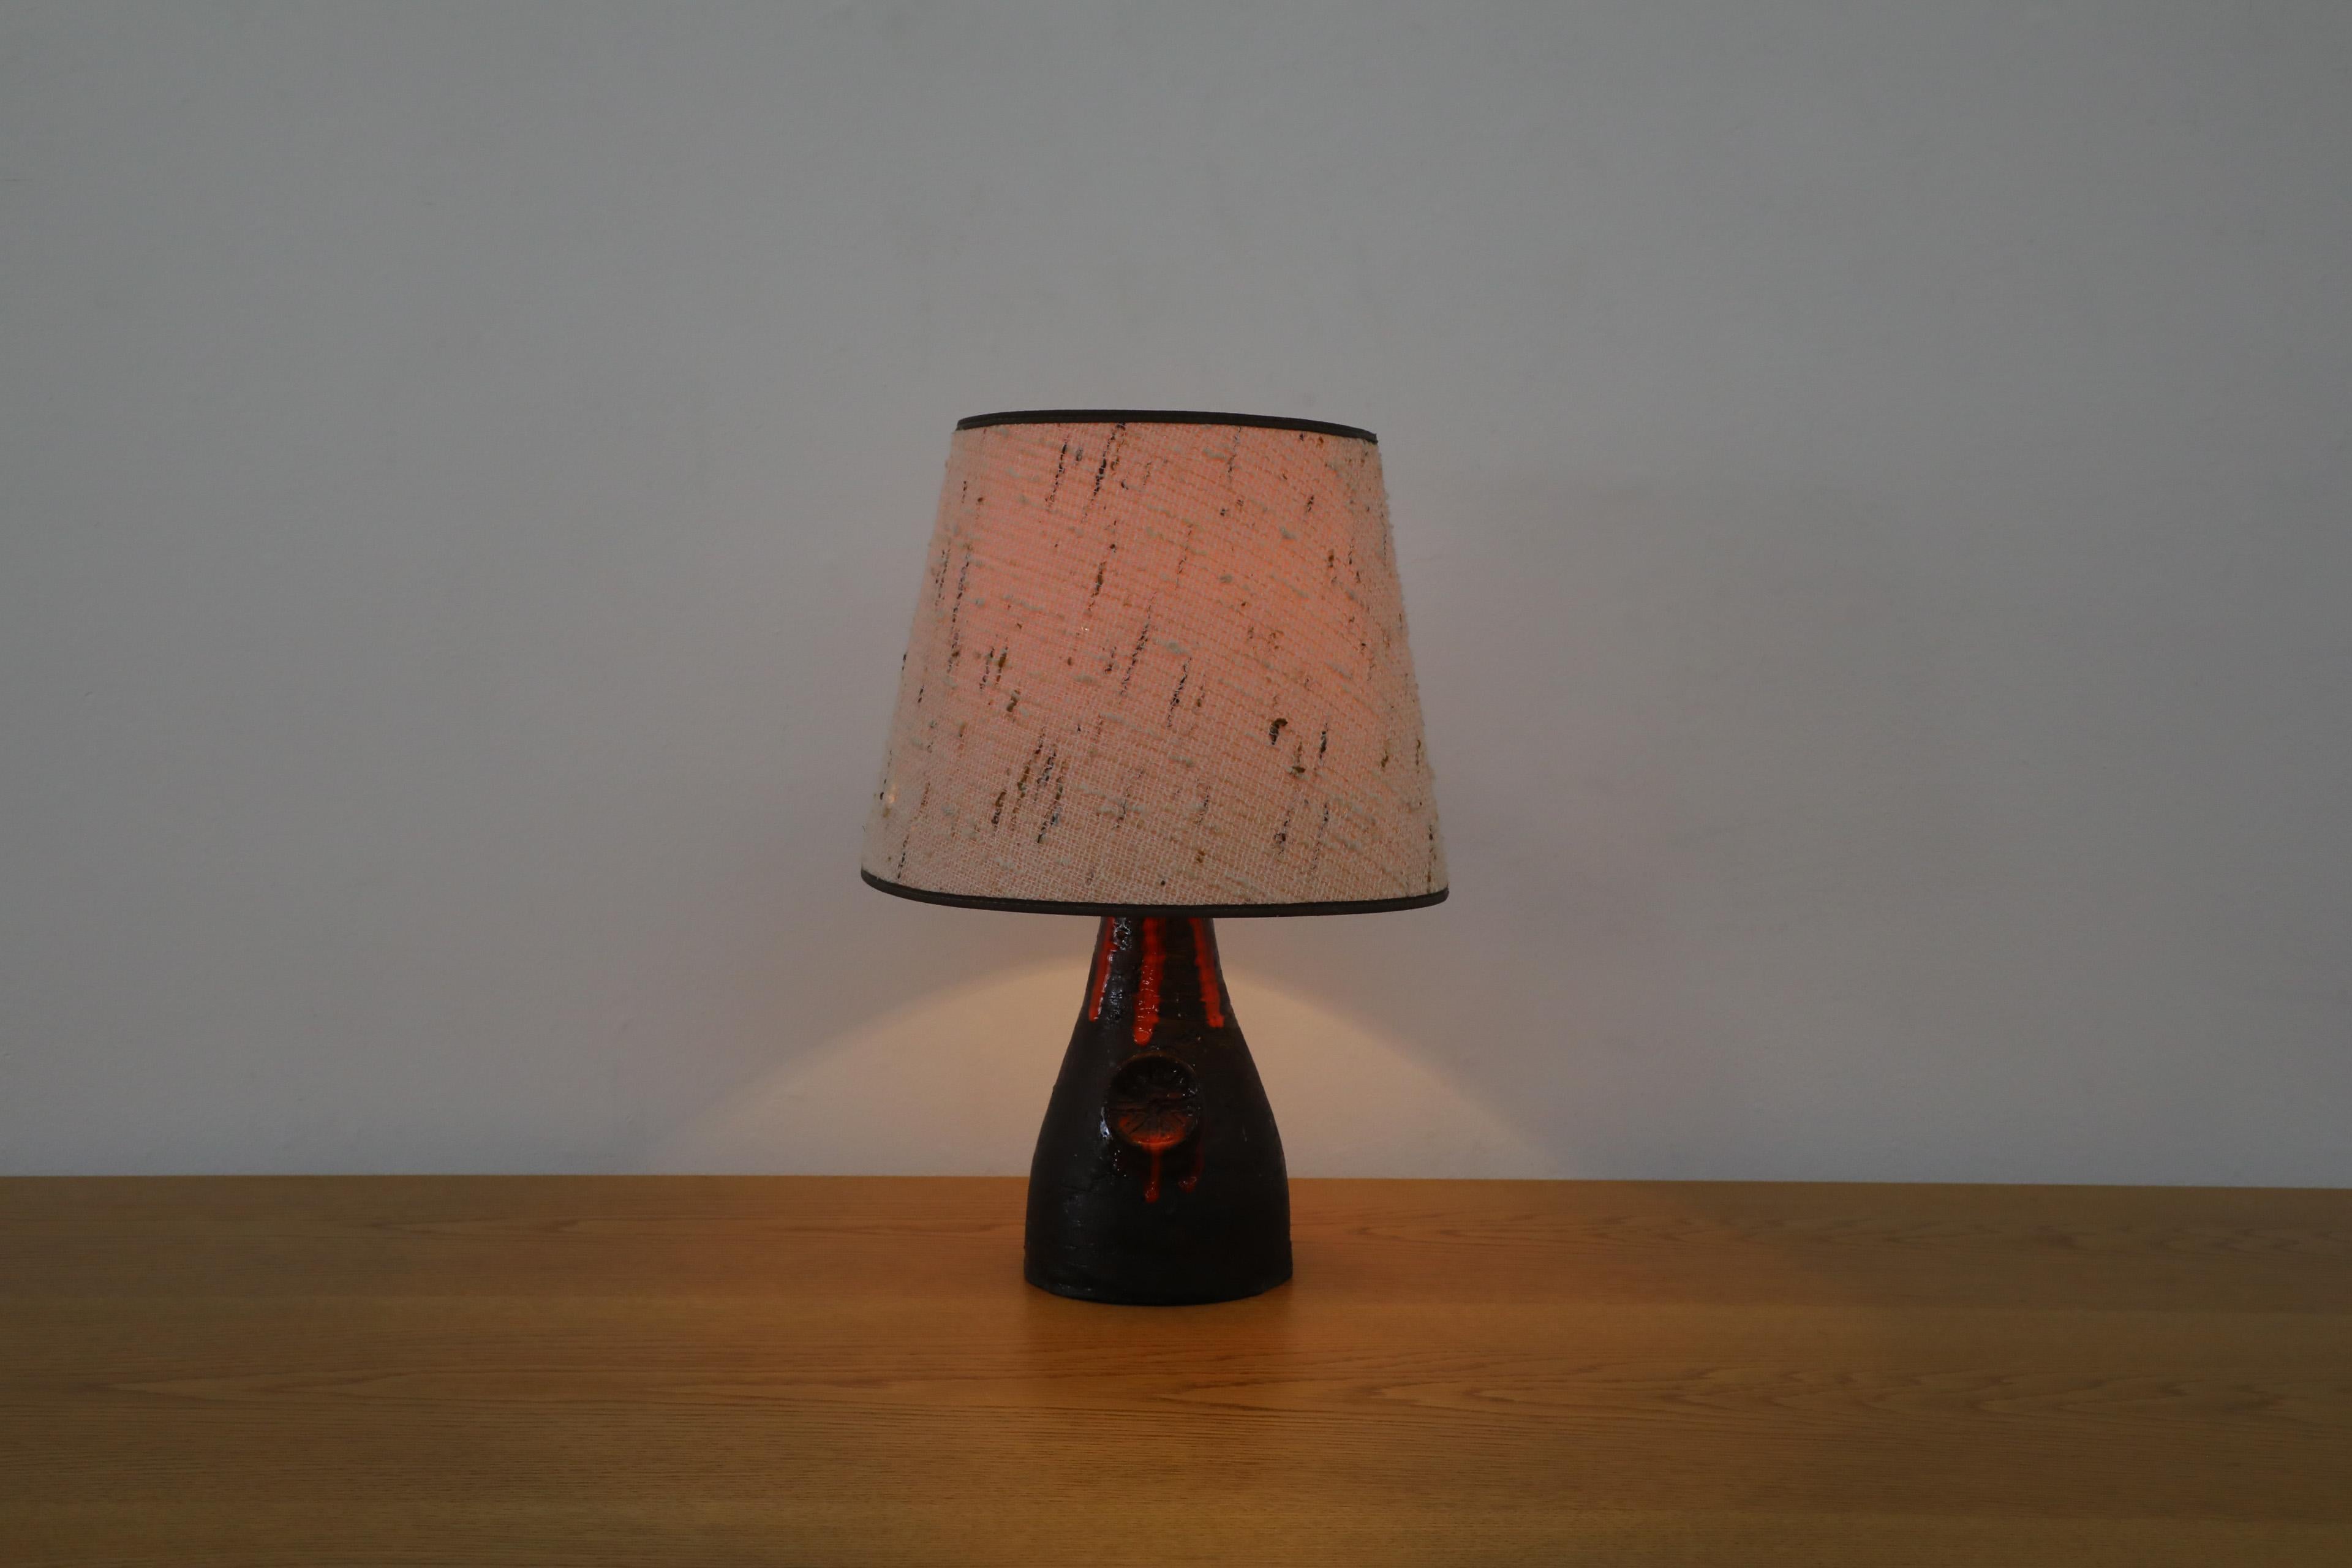 German Dutch Mid-Century Black Ceramic Volcanic Table Lamp w/ Red Dripping Effect Glaze For Sale